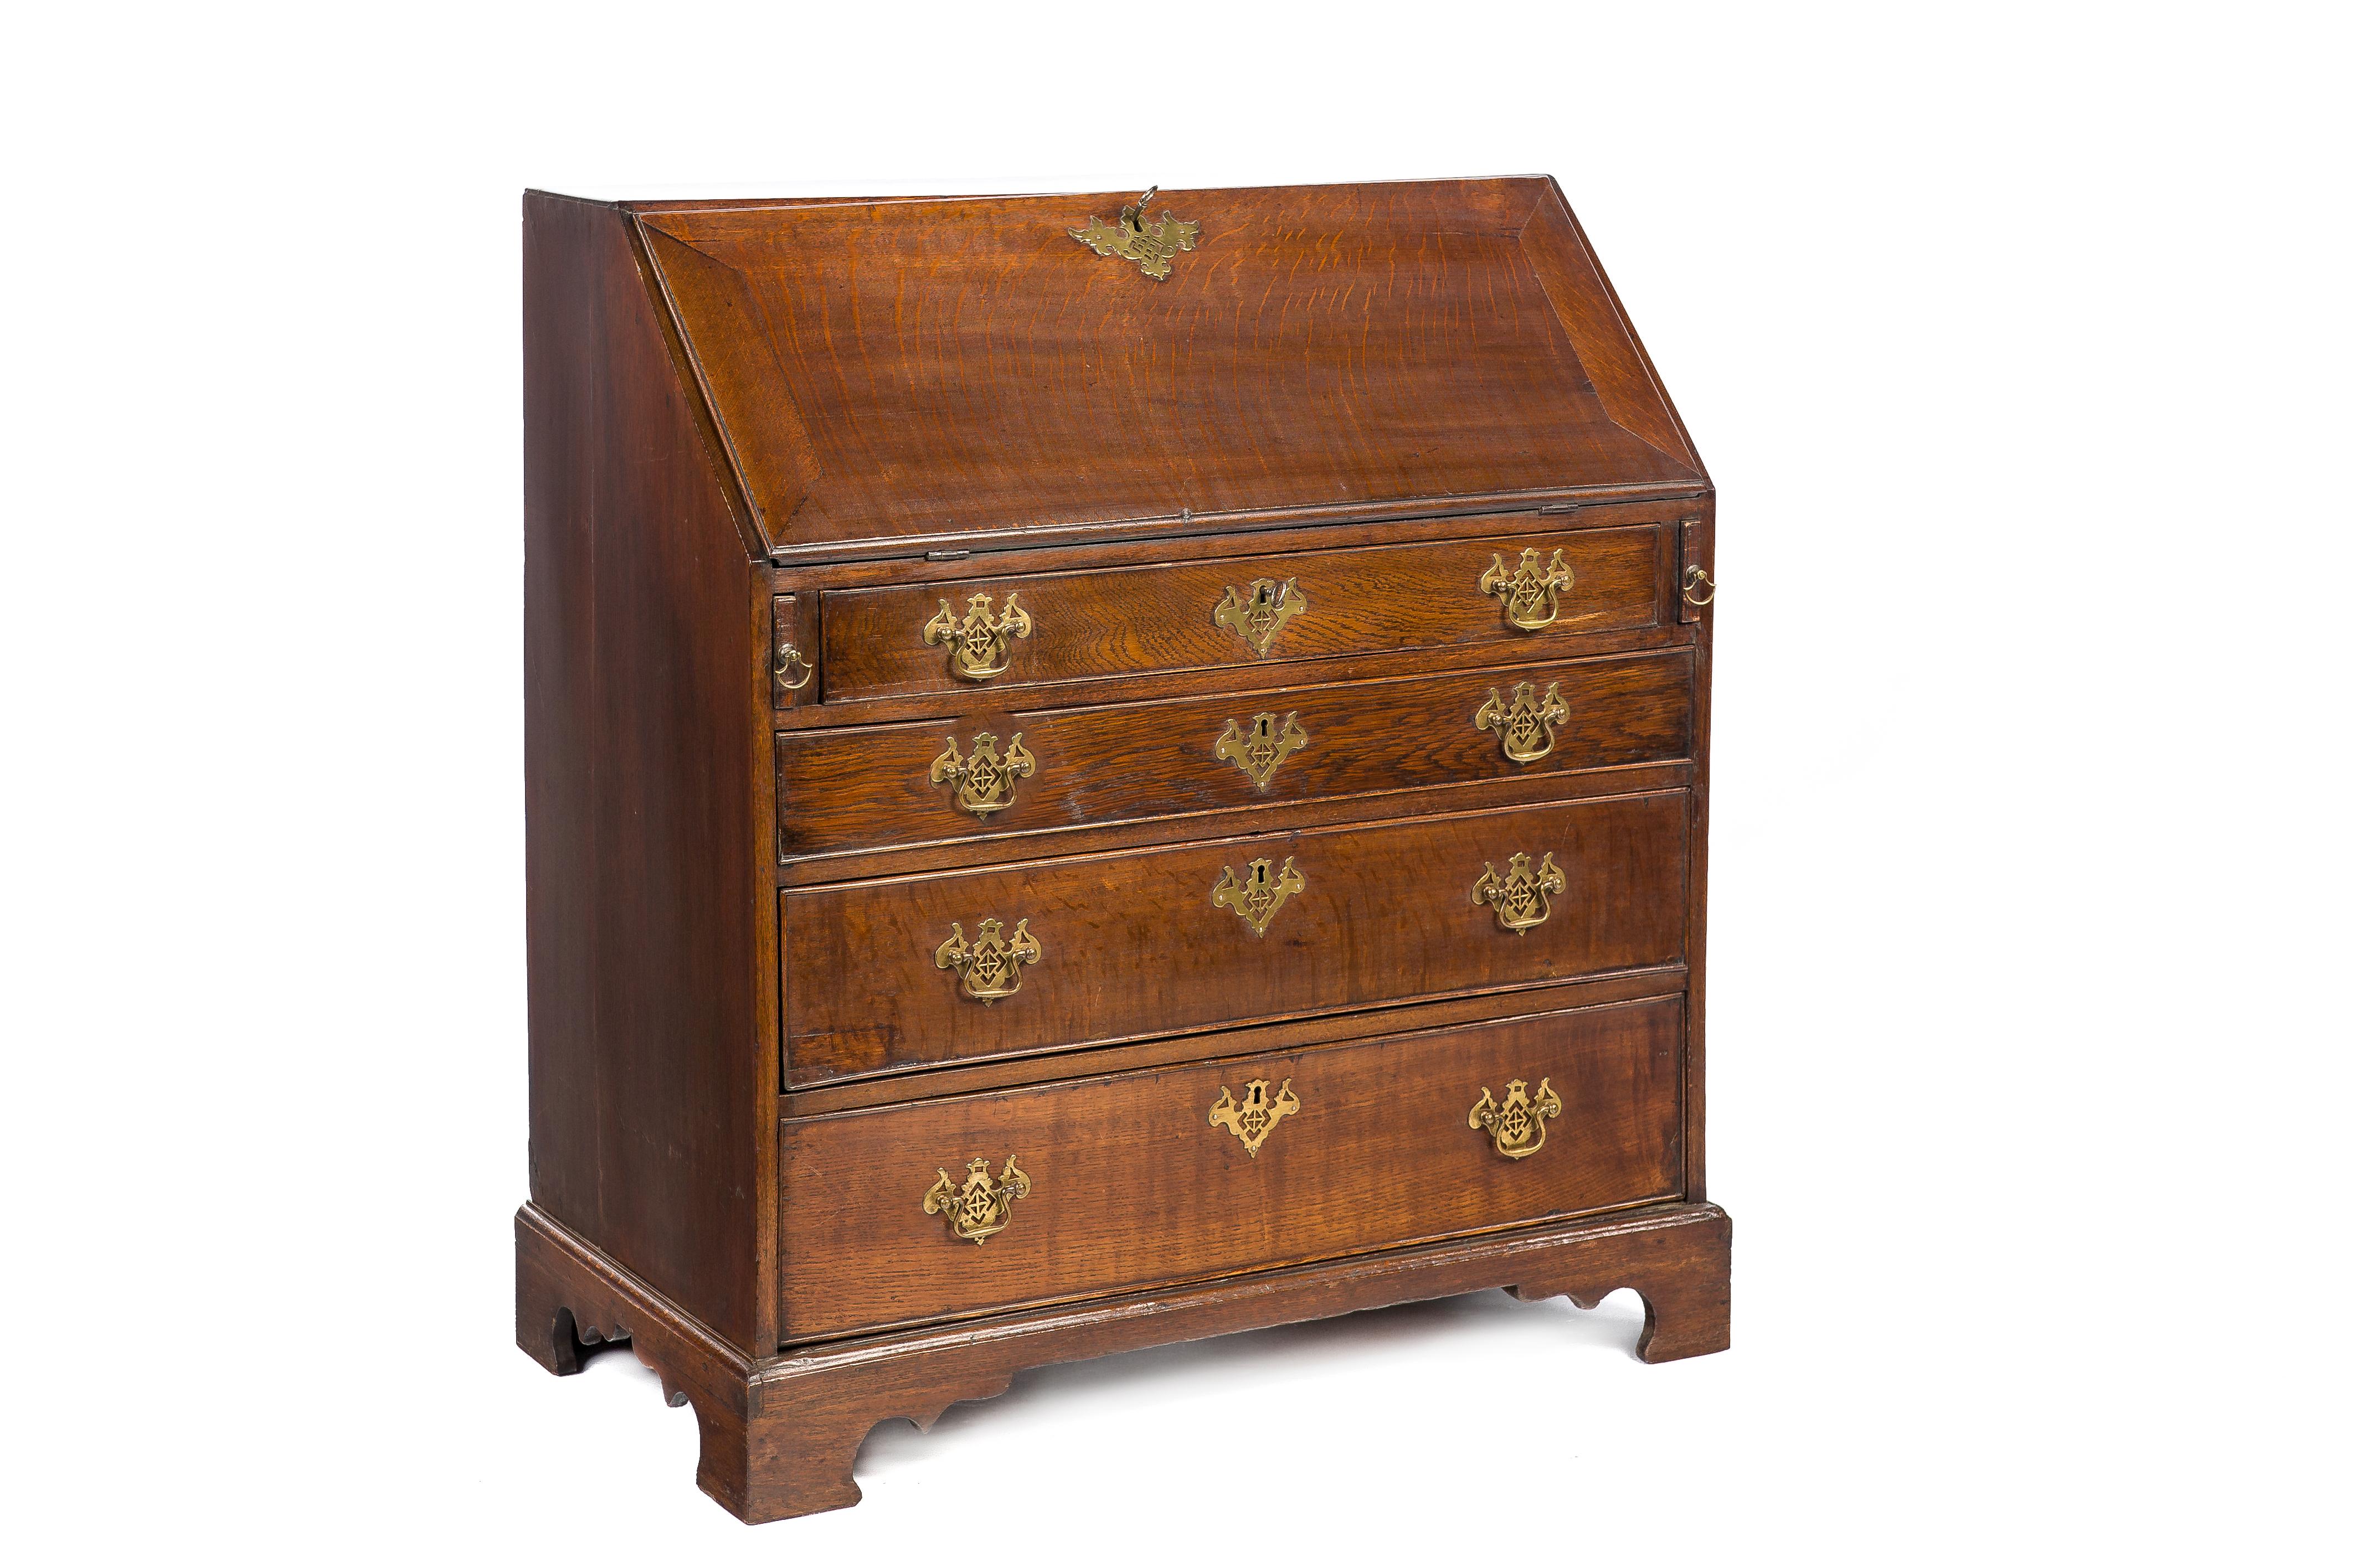 This classic slant front desk or bureau was made in England in the early 19th century. 
It was made in the finest quality watered European oak. The secretary is elevated on bracket feet. It features four drawers fitted with the original brass ajour